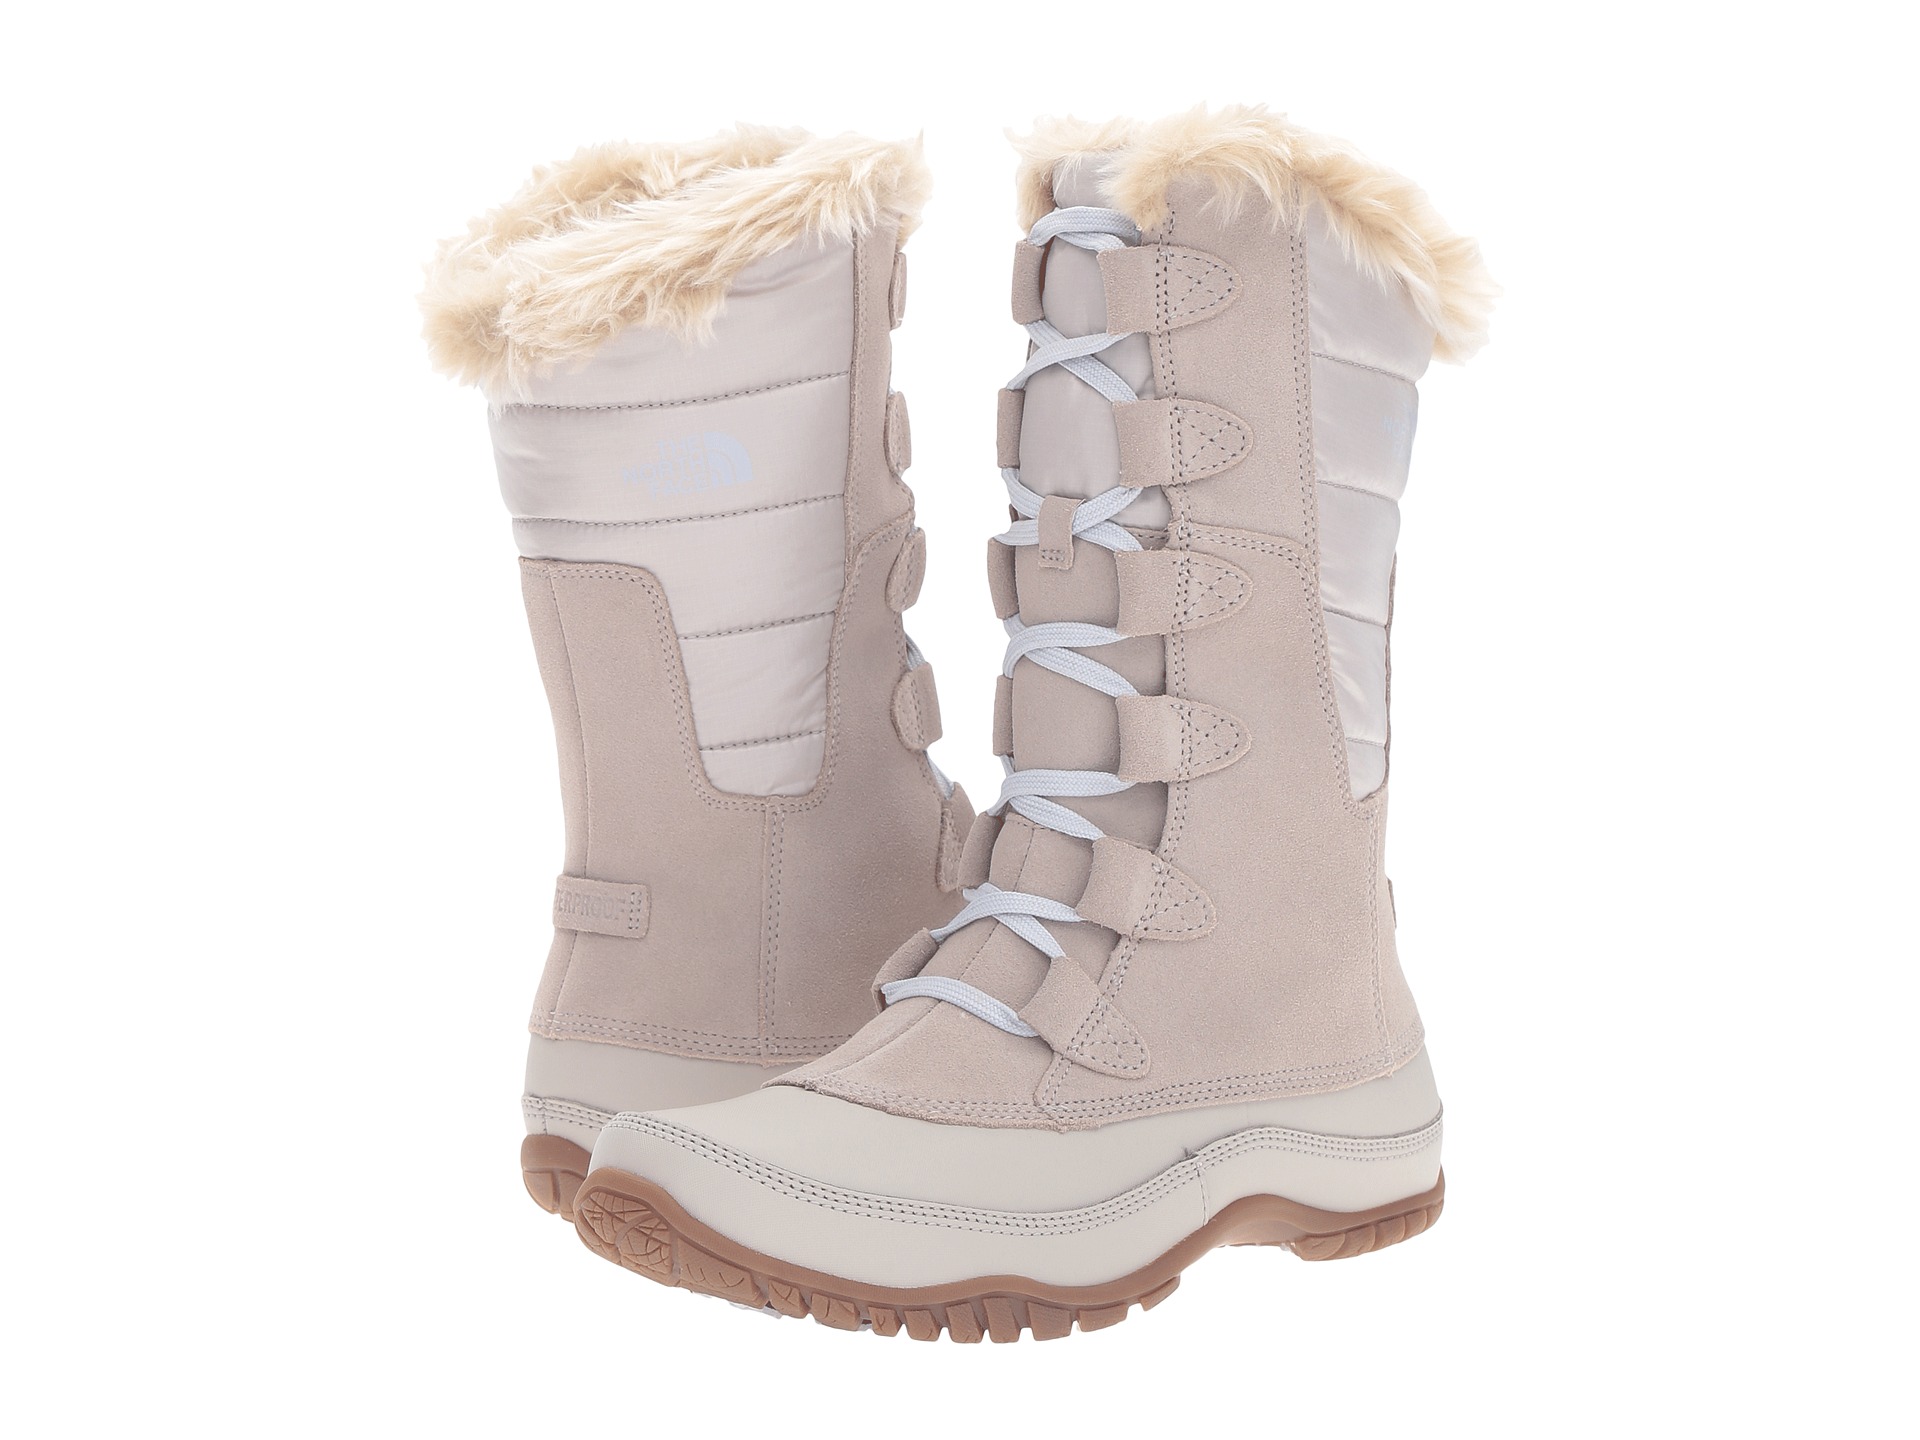 north face ladies snow boots